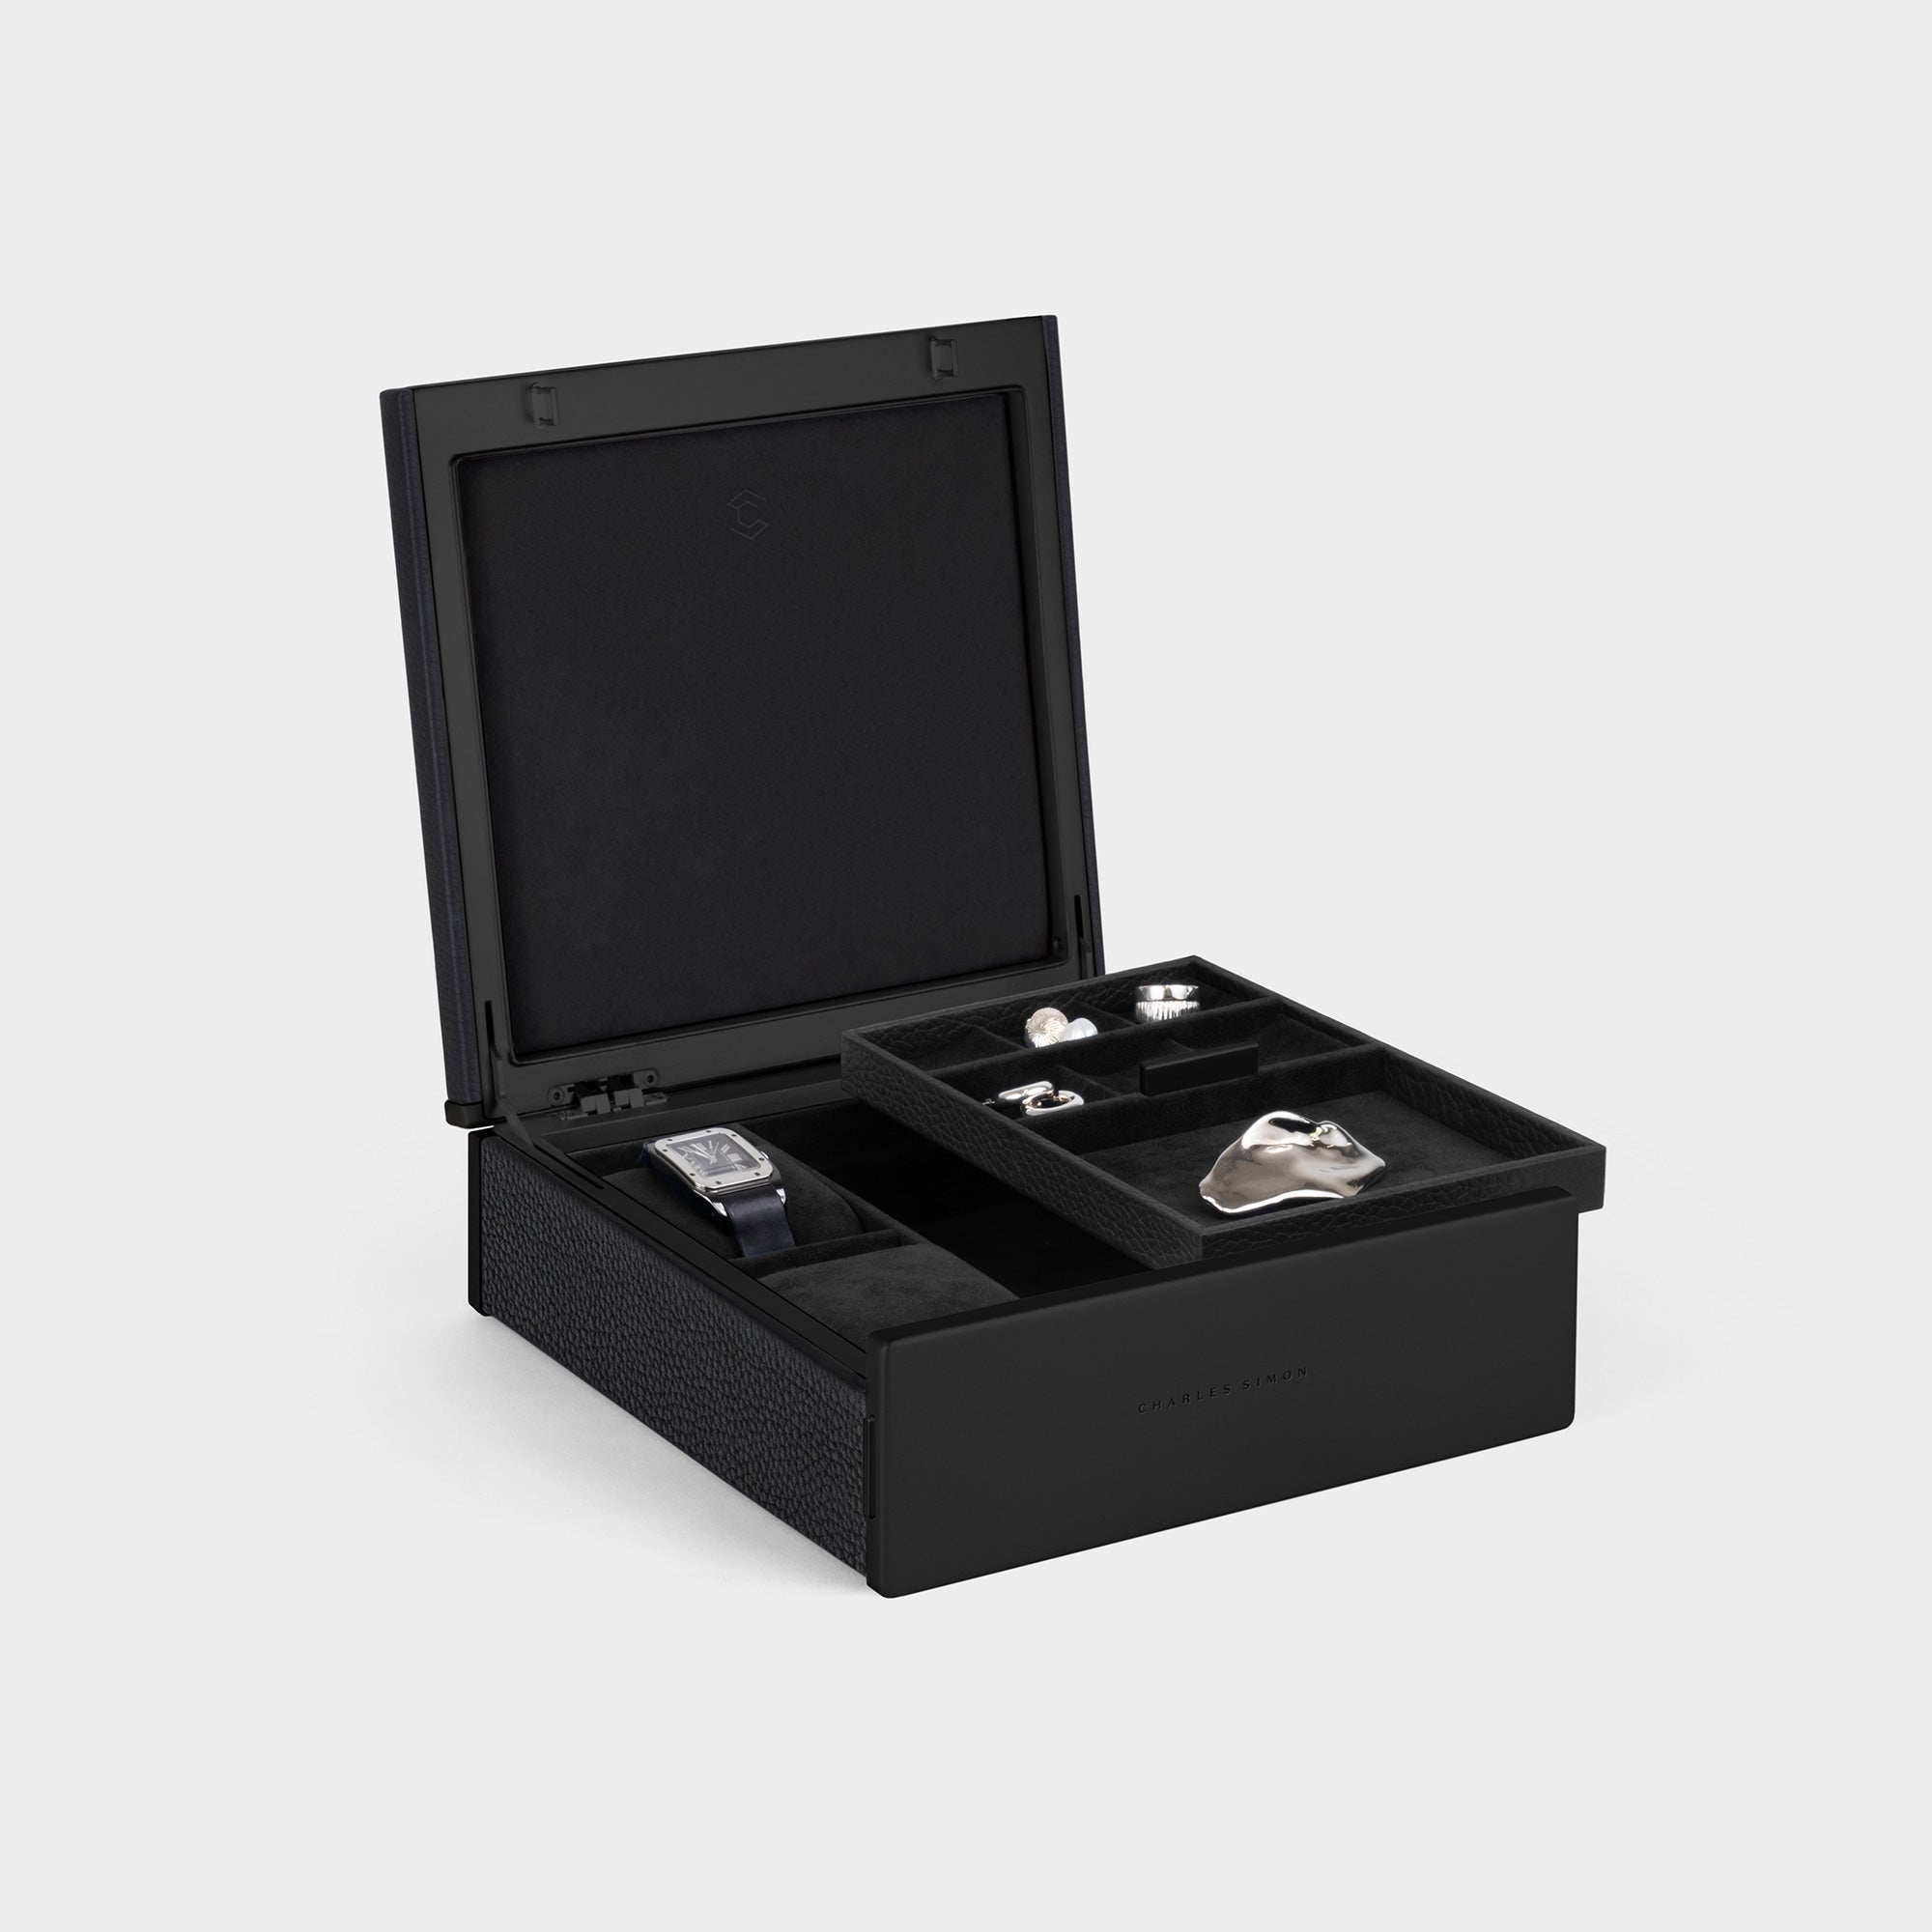 Product photo of all black Taylor 2 Watch and Jewelry box displaying 2 watches and organizing an entire jewelry collection at home